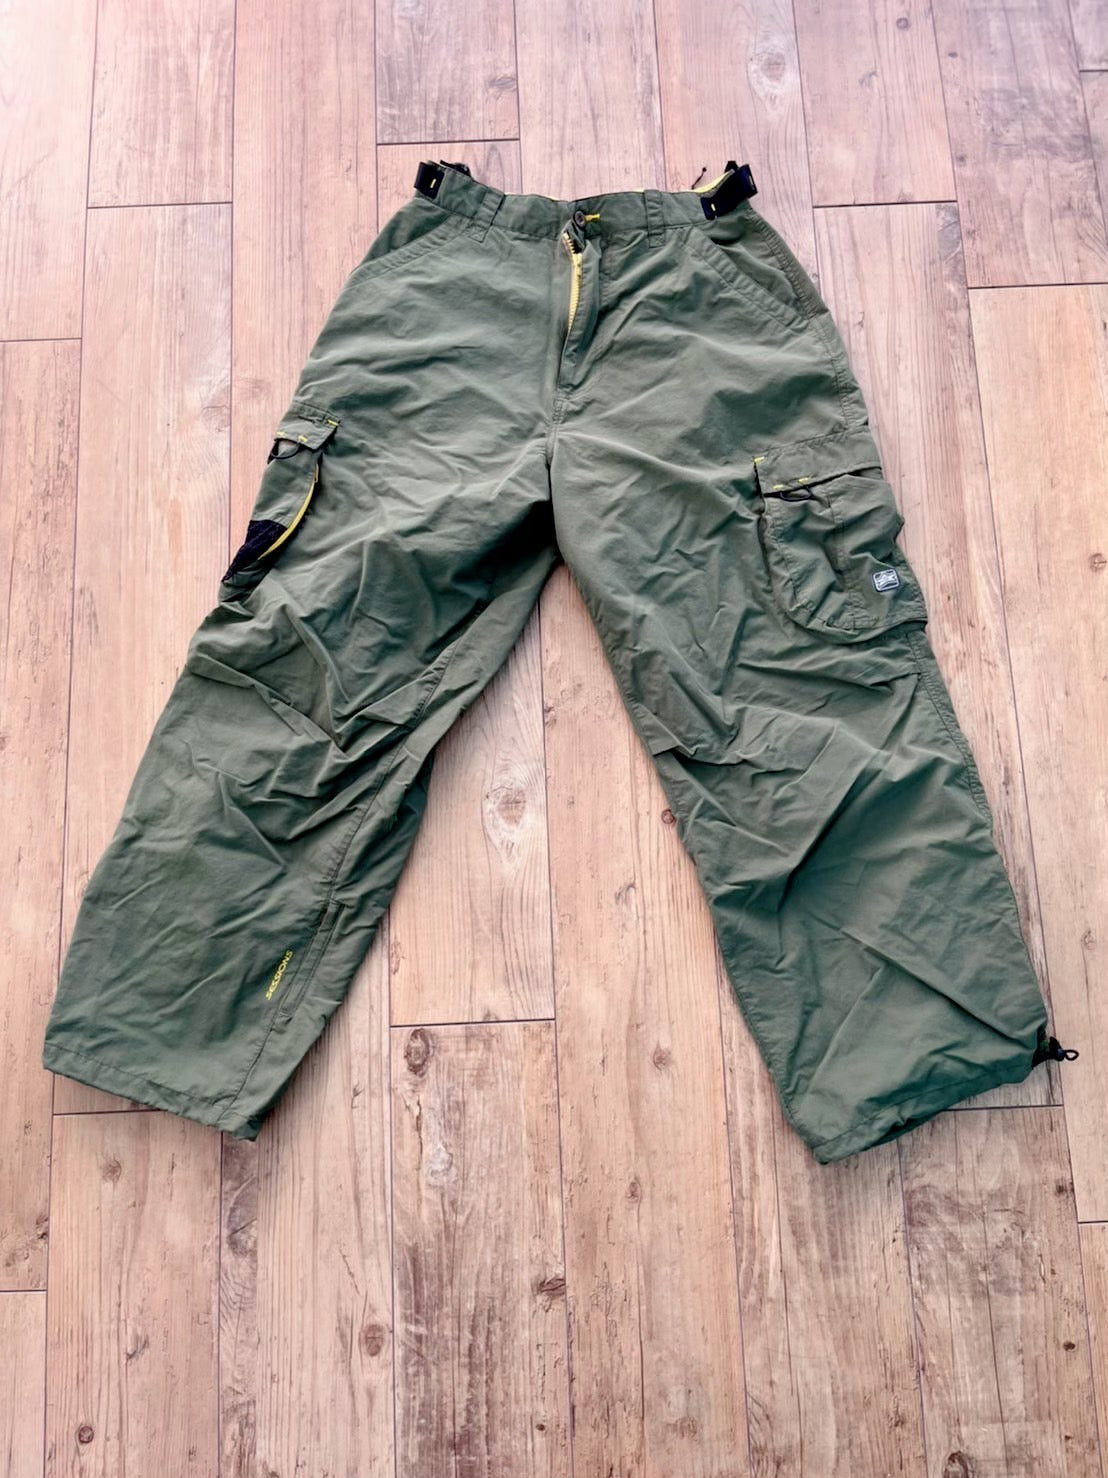 【Dead Stock】 90's sessions surf skate cargo pants (size:32inch)